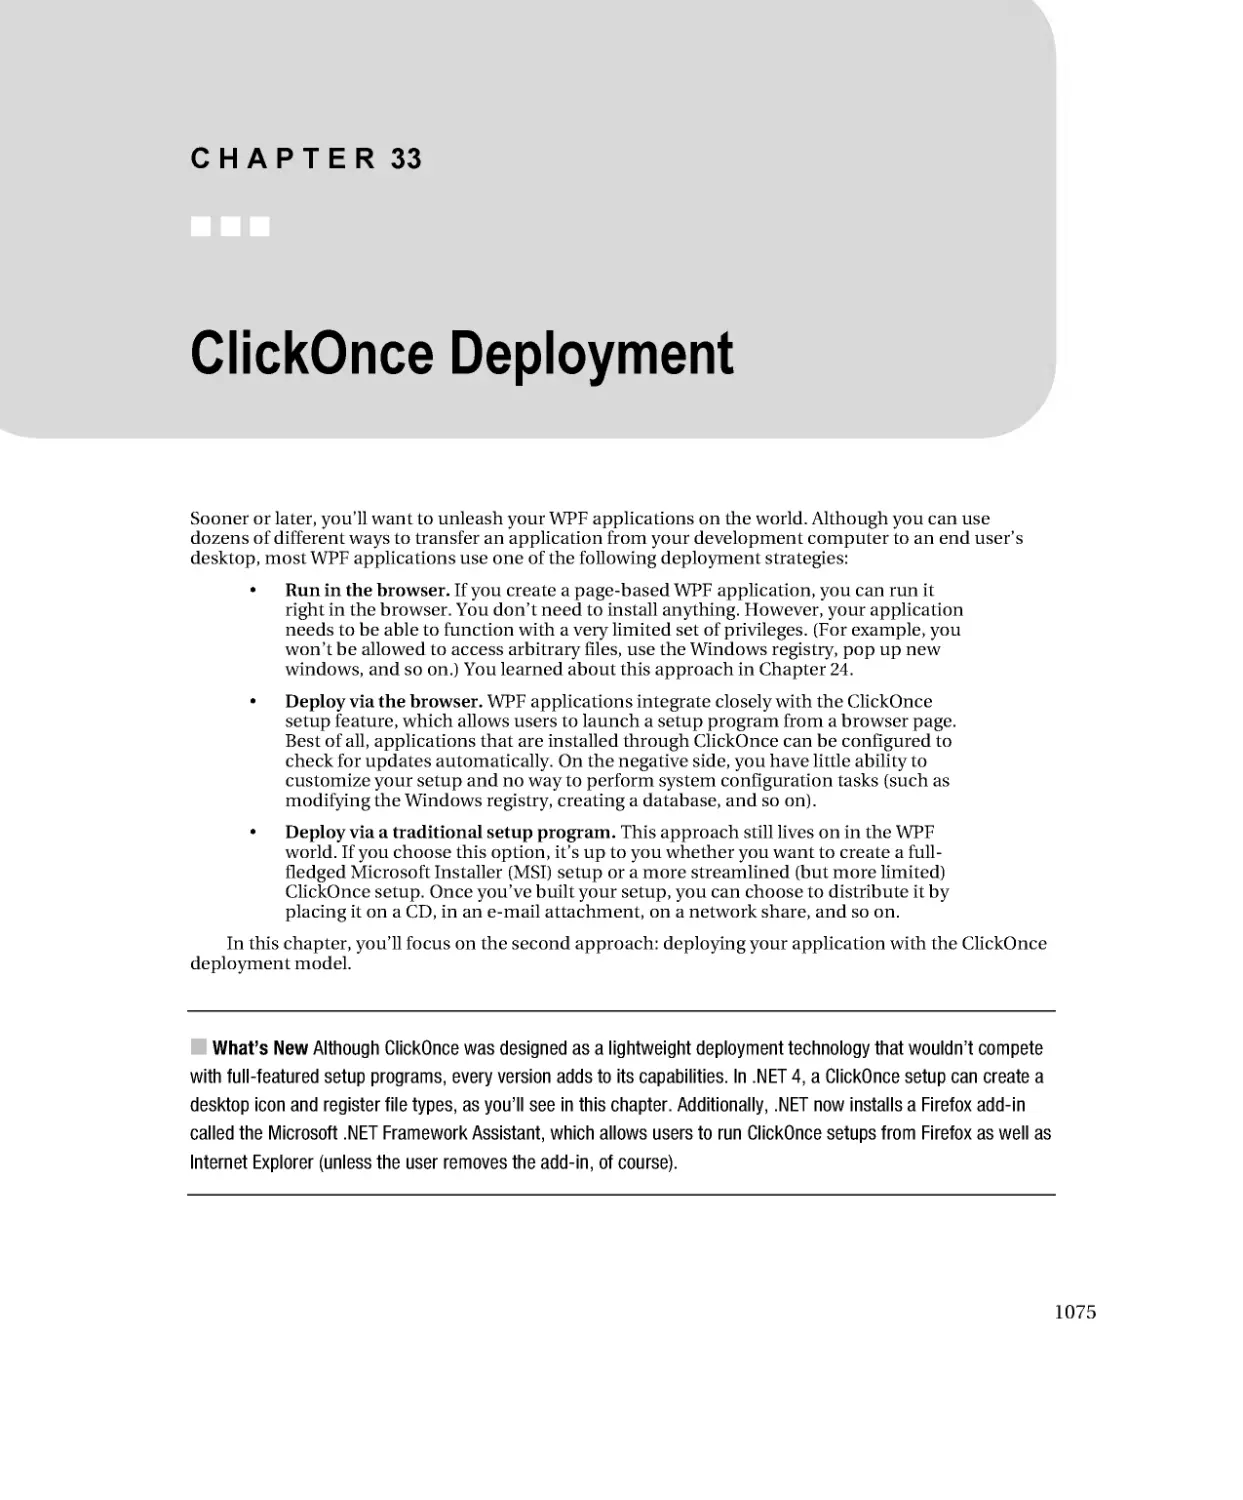 ClickOnce Deployment